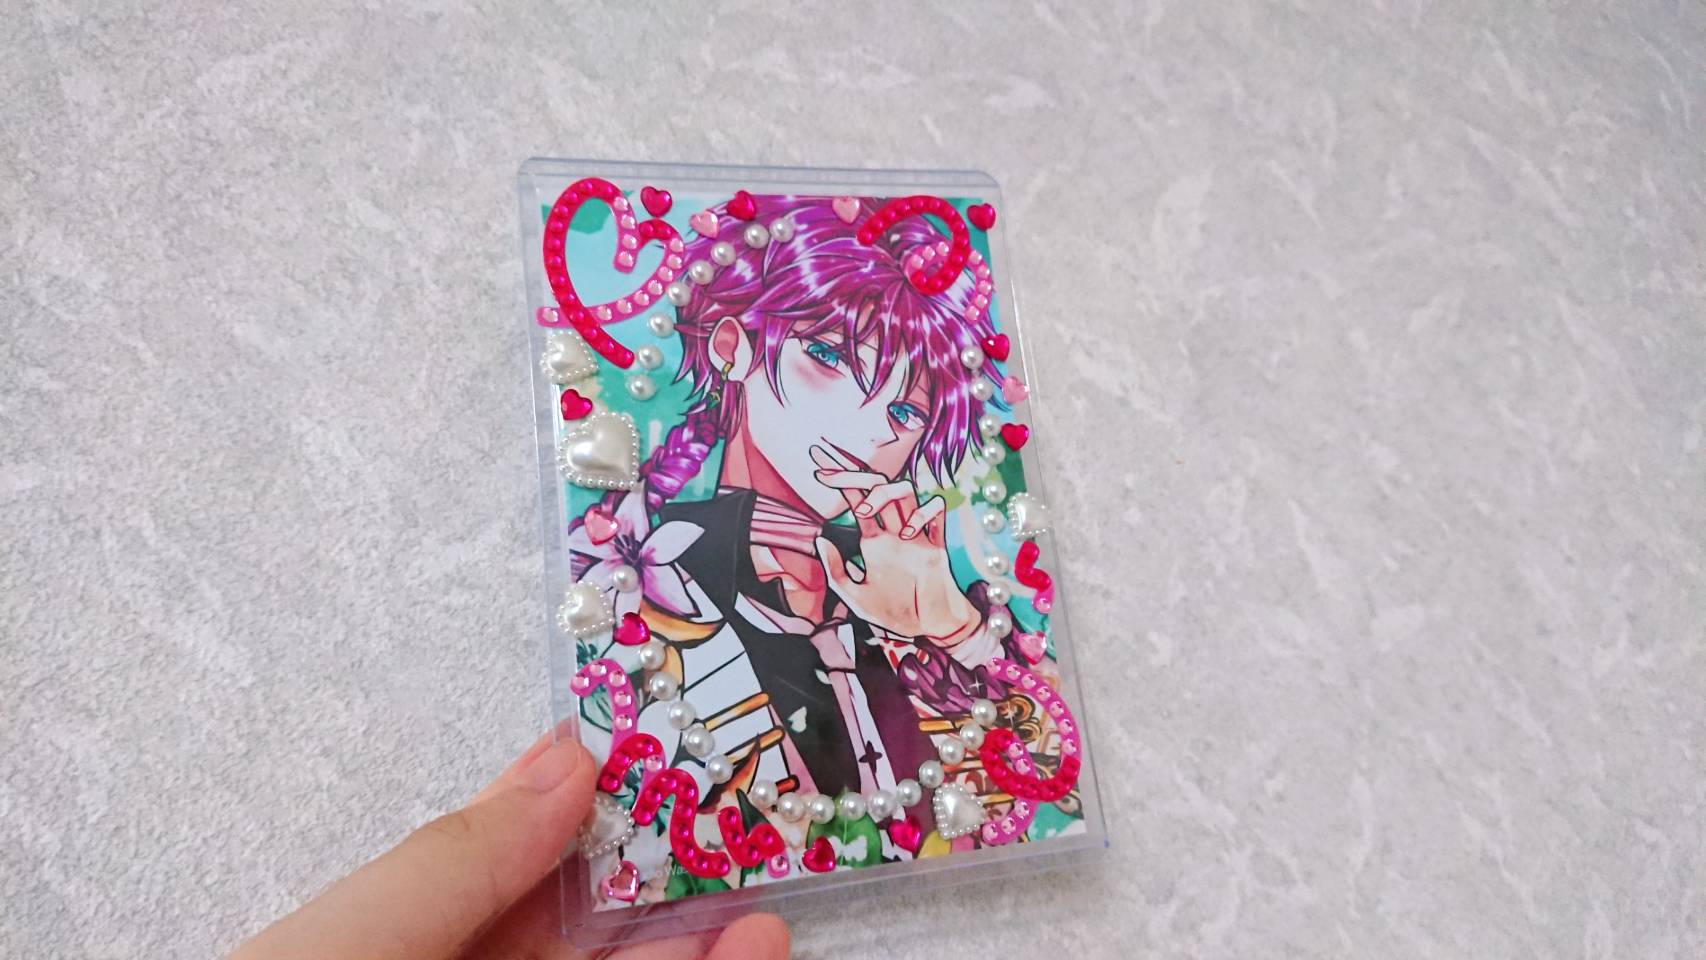 Complete by sticking a sticker on the hard card case